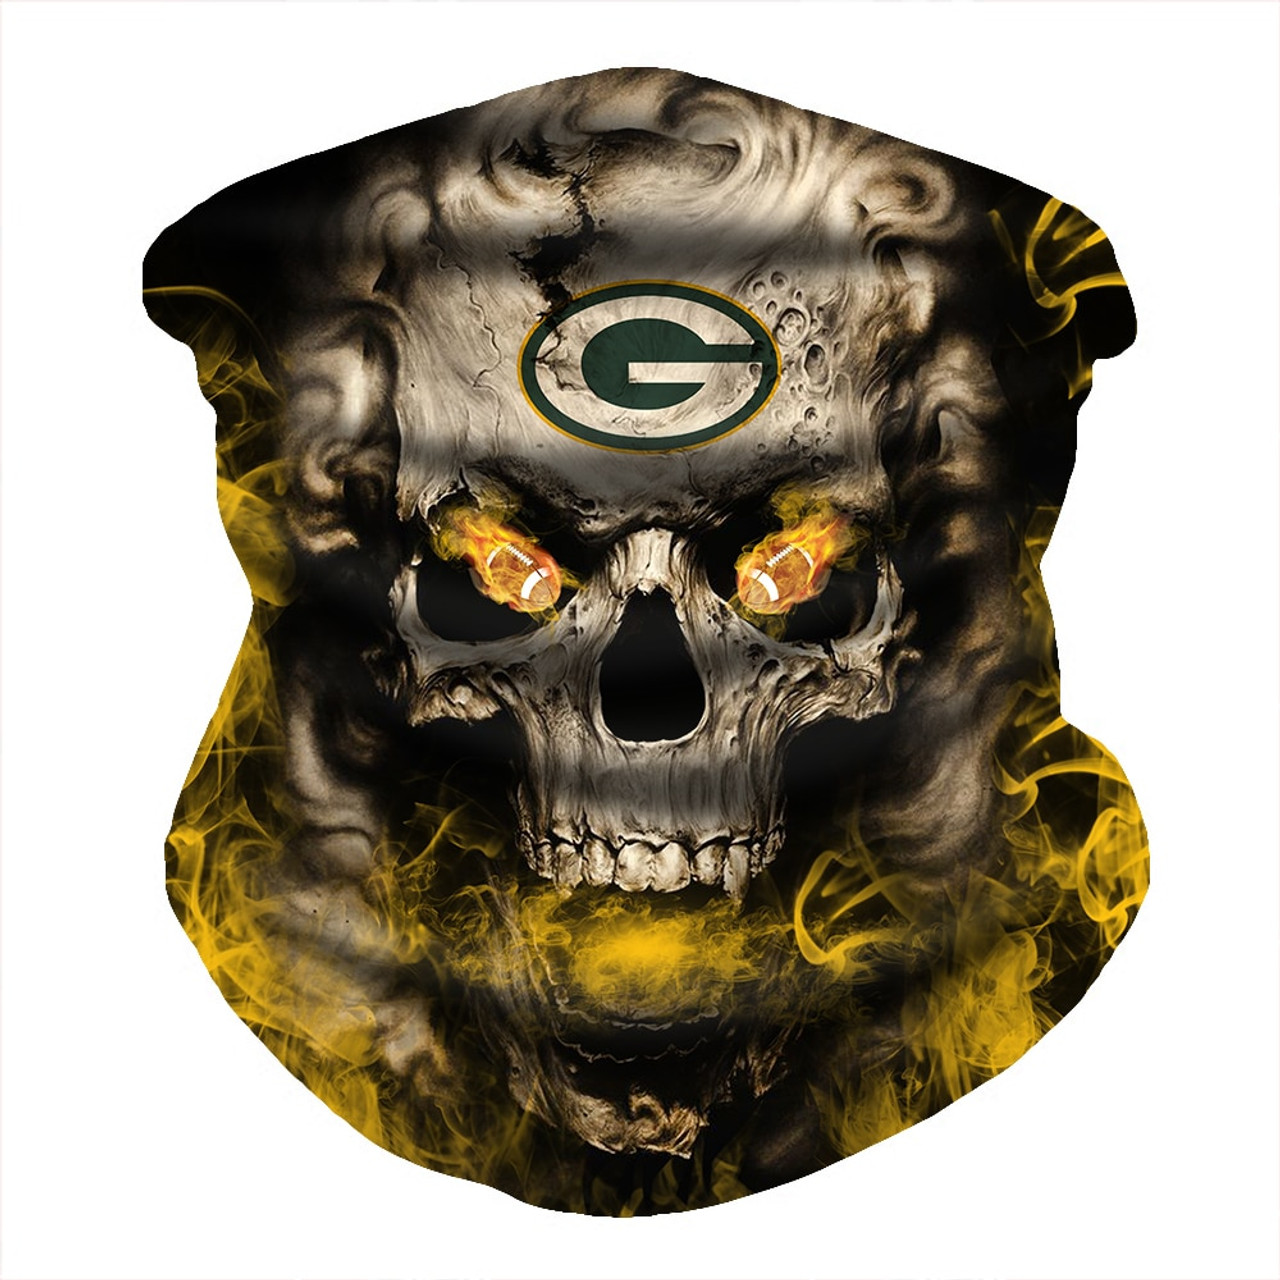 OFFICIAL-N.F.L.GREEN-BAY-PACKERS-FACE-MASK & GAITER-NECK-SCARFS/MULTI-USE-NFL.SPORT-FACE-MASK!